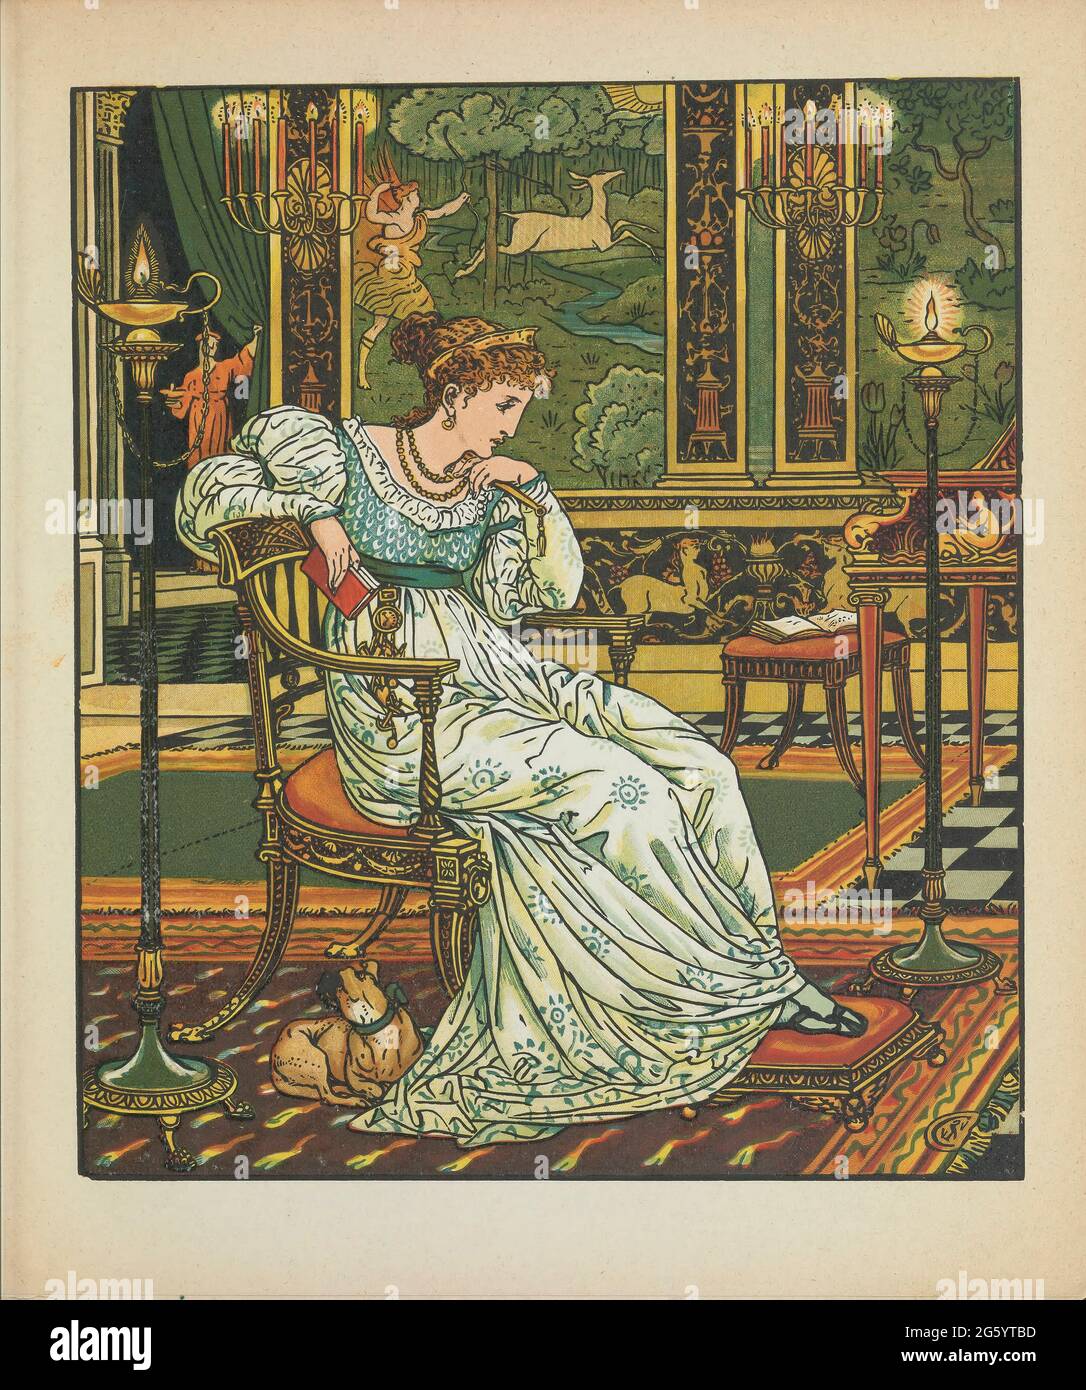 The Hind in the Woods AKA The White Doe or The Doe in the Woods is a French literary fairy tale written by Madame d'Aulnoy. from the book ' The hind in the wood ' by Walter Crane Originally written by Madame d' Aulnoy (Marie-Catherine) Stock Photo